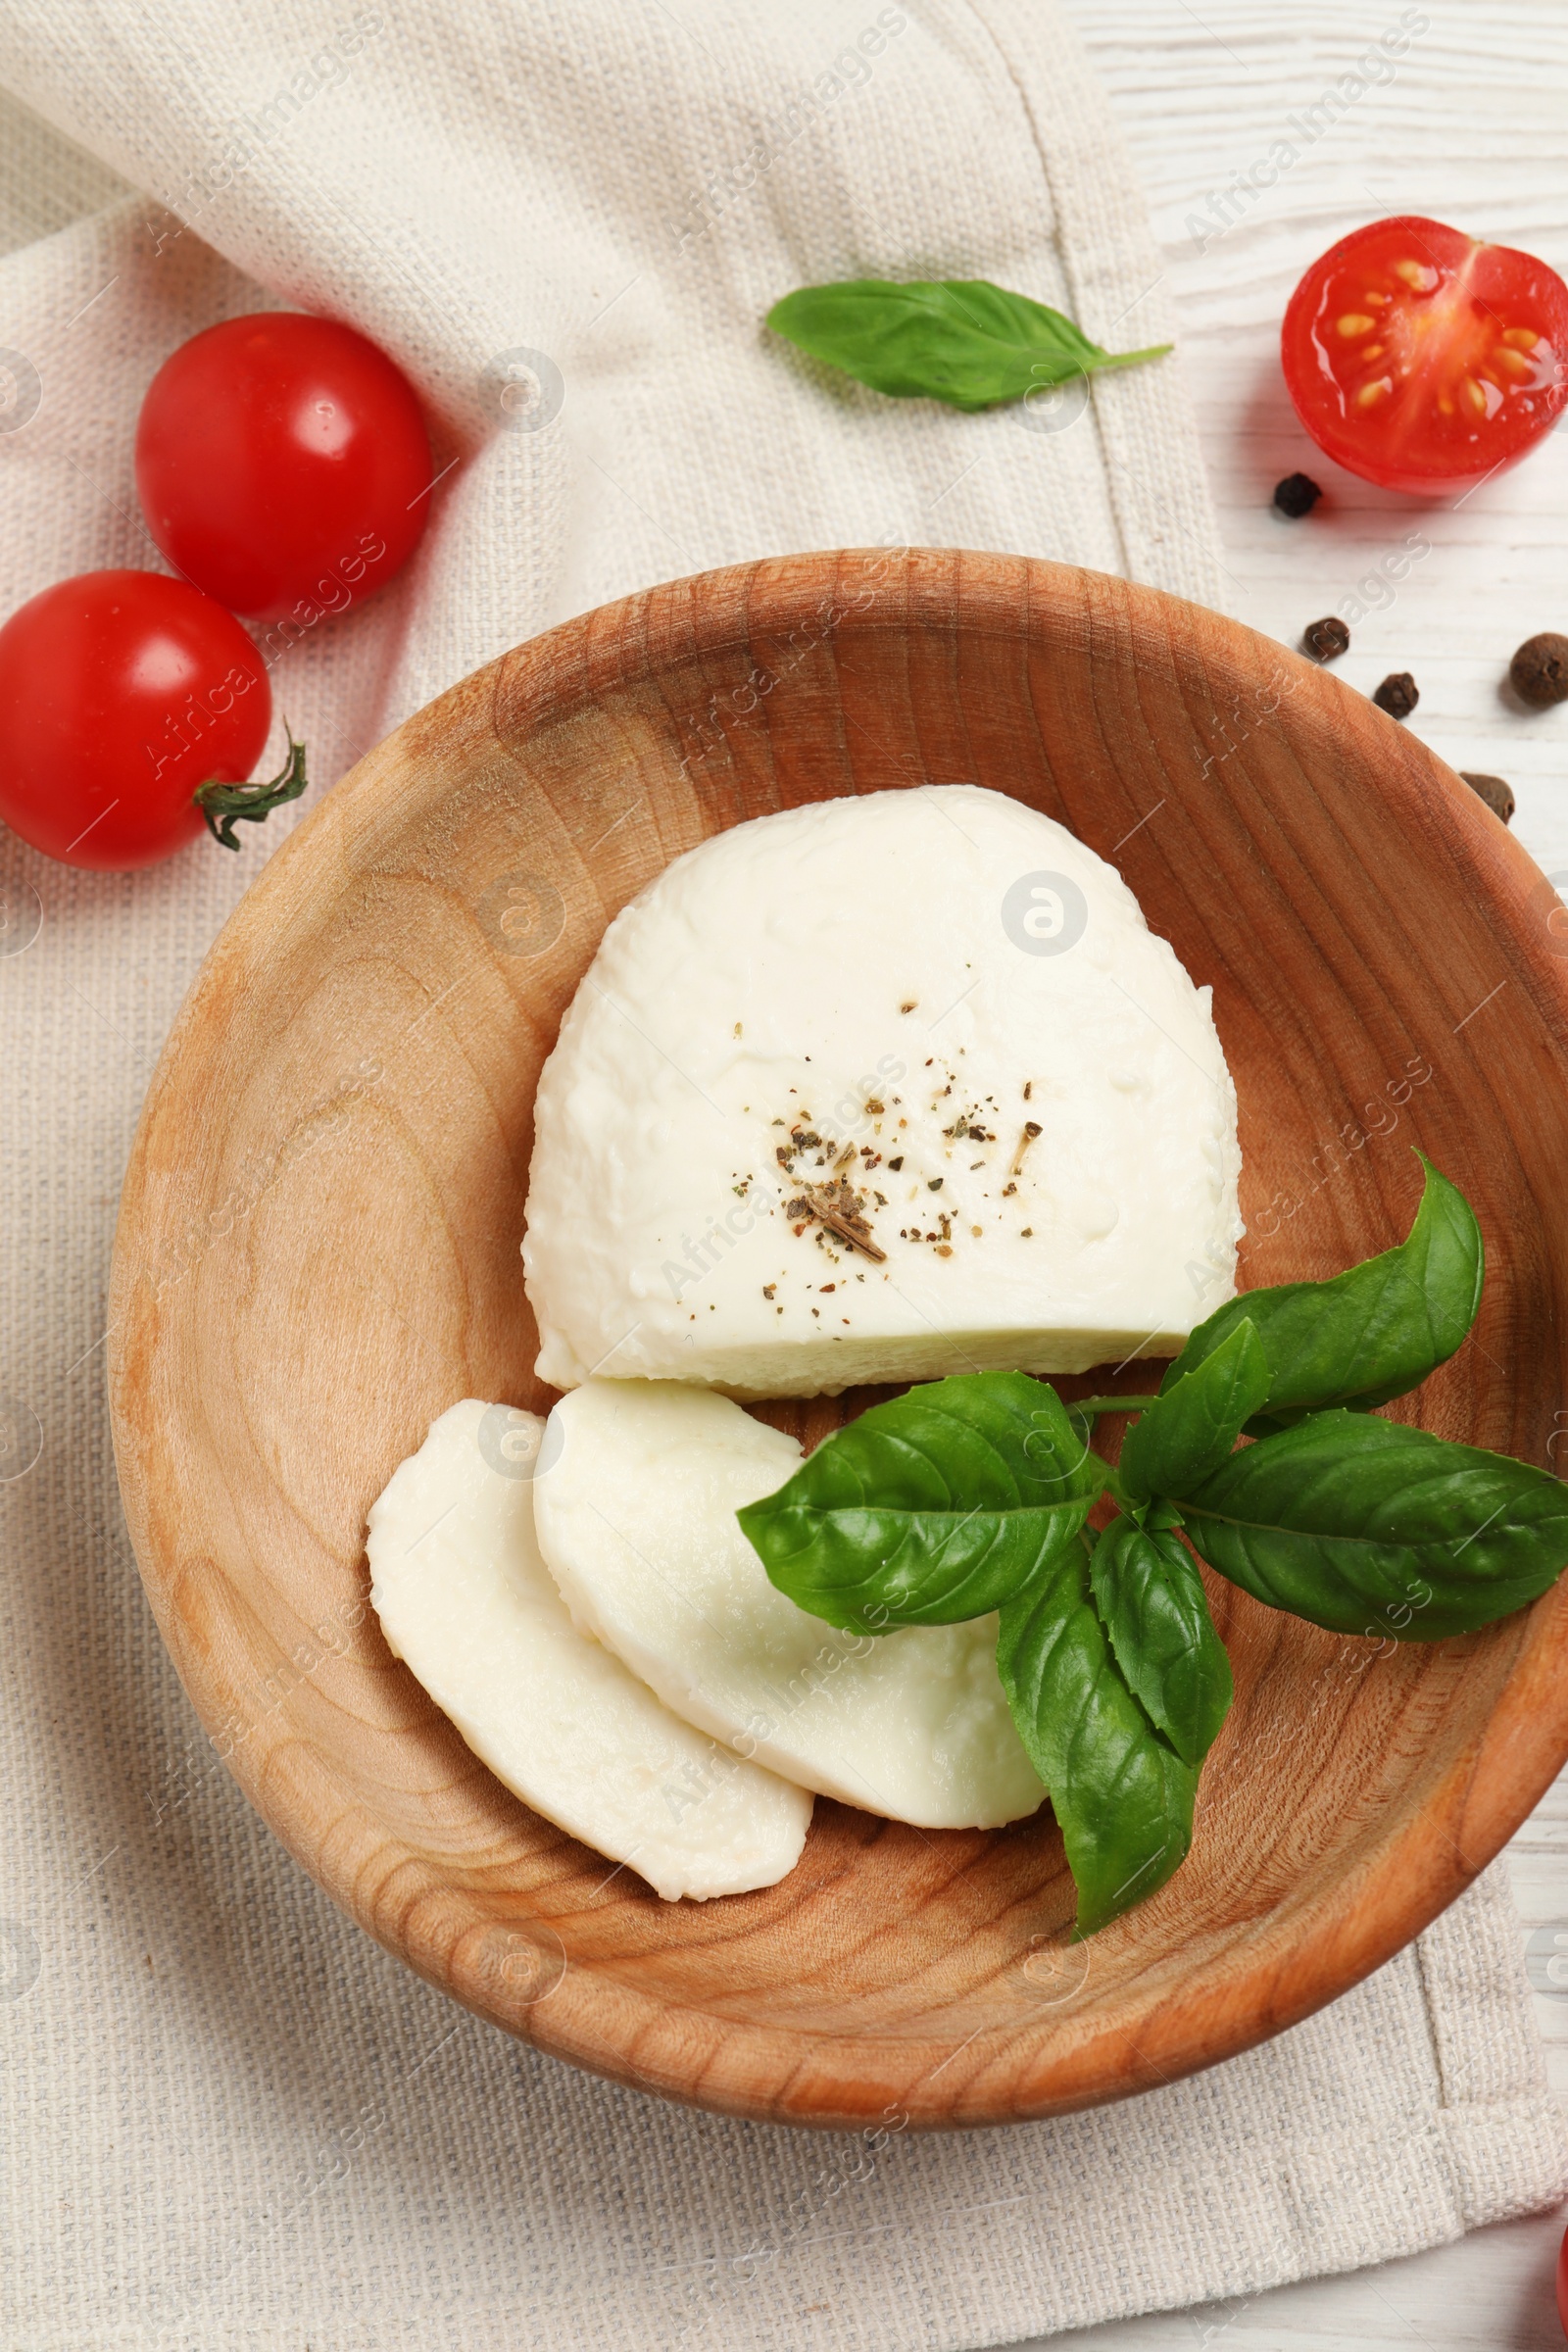 Photo of Delicious mozzarella with tomatoes and basil leaves in wooden bowl on table, flat lay